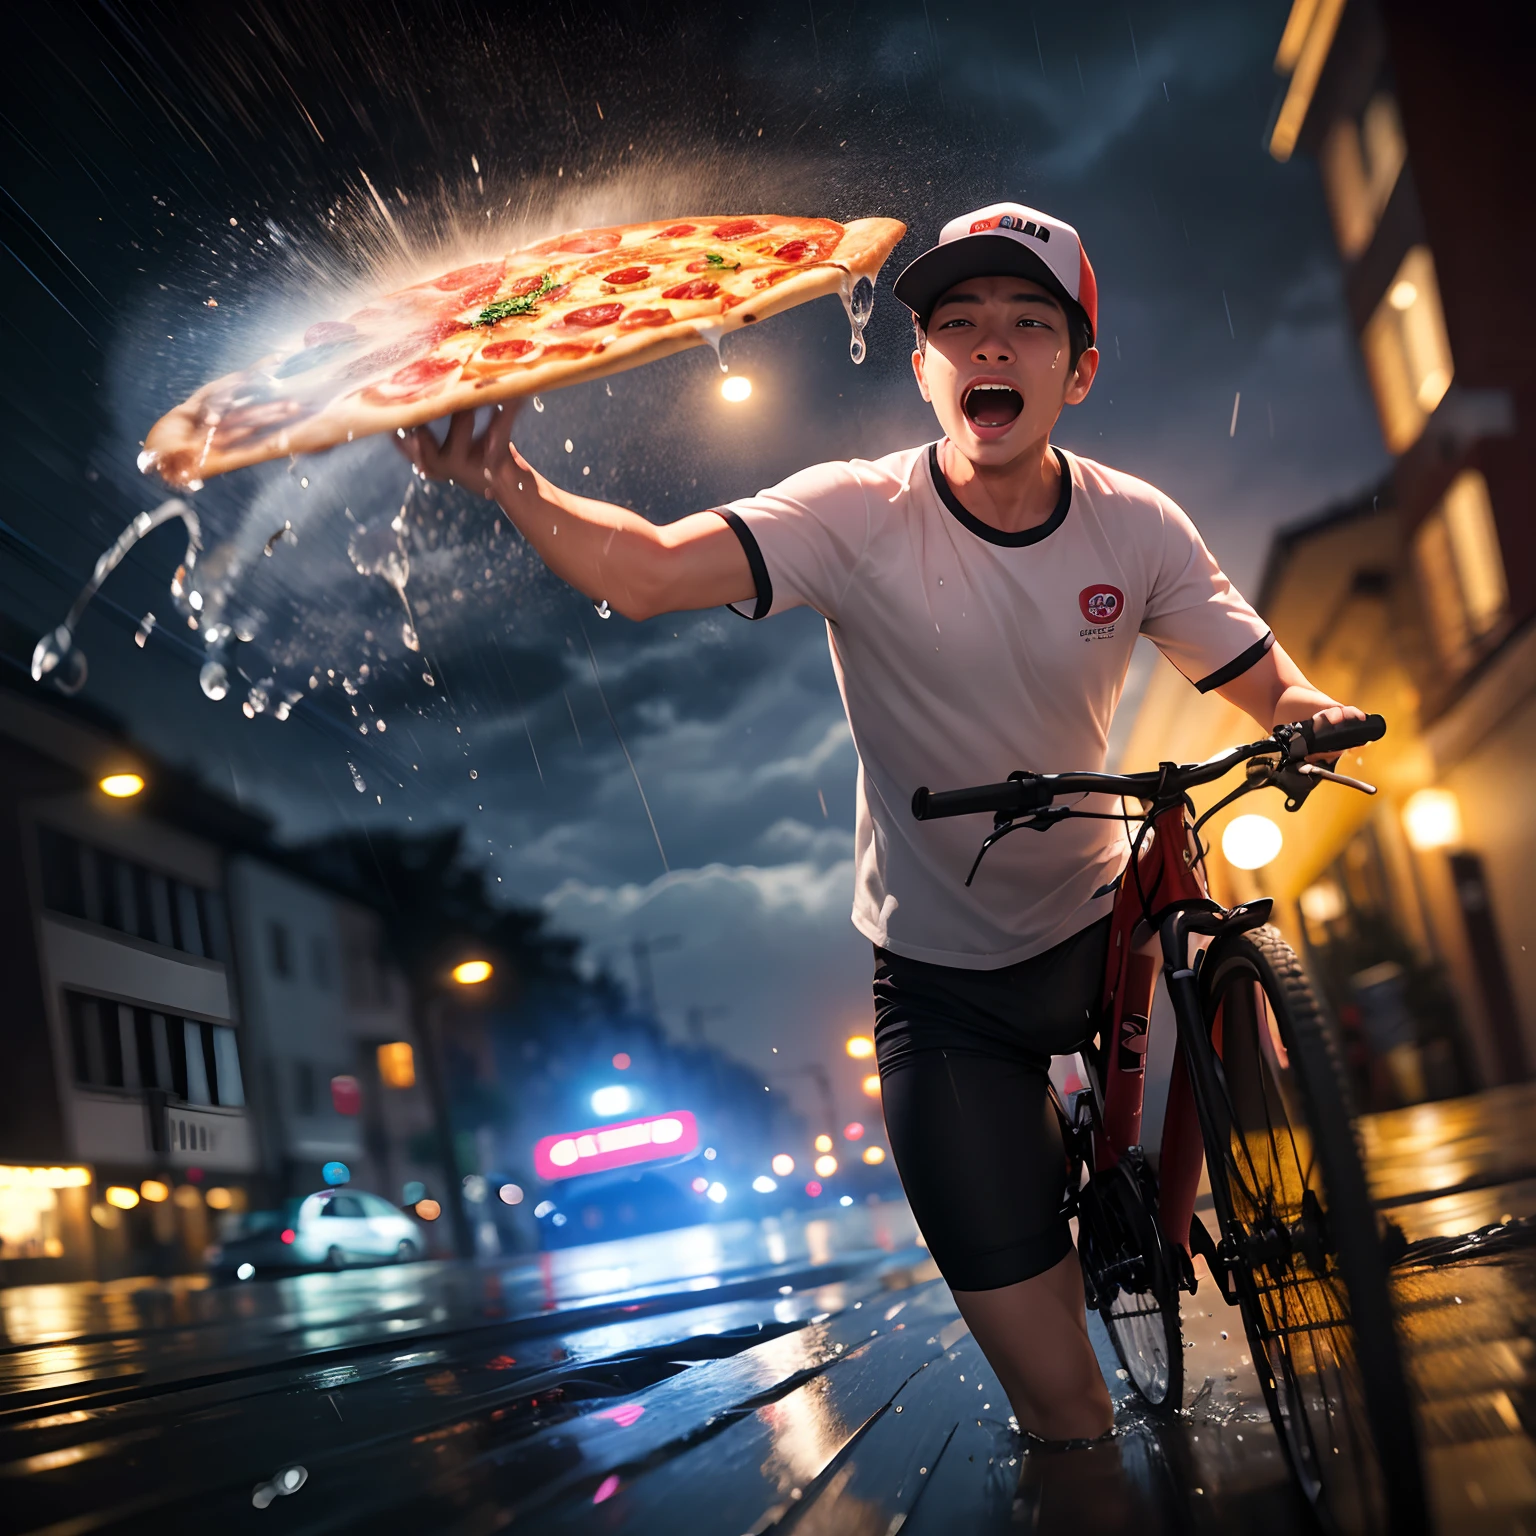 focus on pizza deliver man, head shot, running by bike, screaming, heavy rain, stormy, typhoon, midnight, from front, motion blur, waterdrop on lens, water splash, top quality